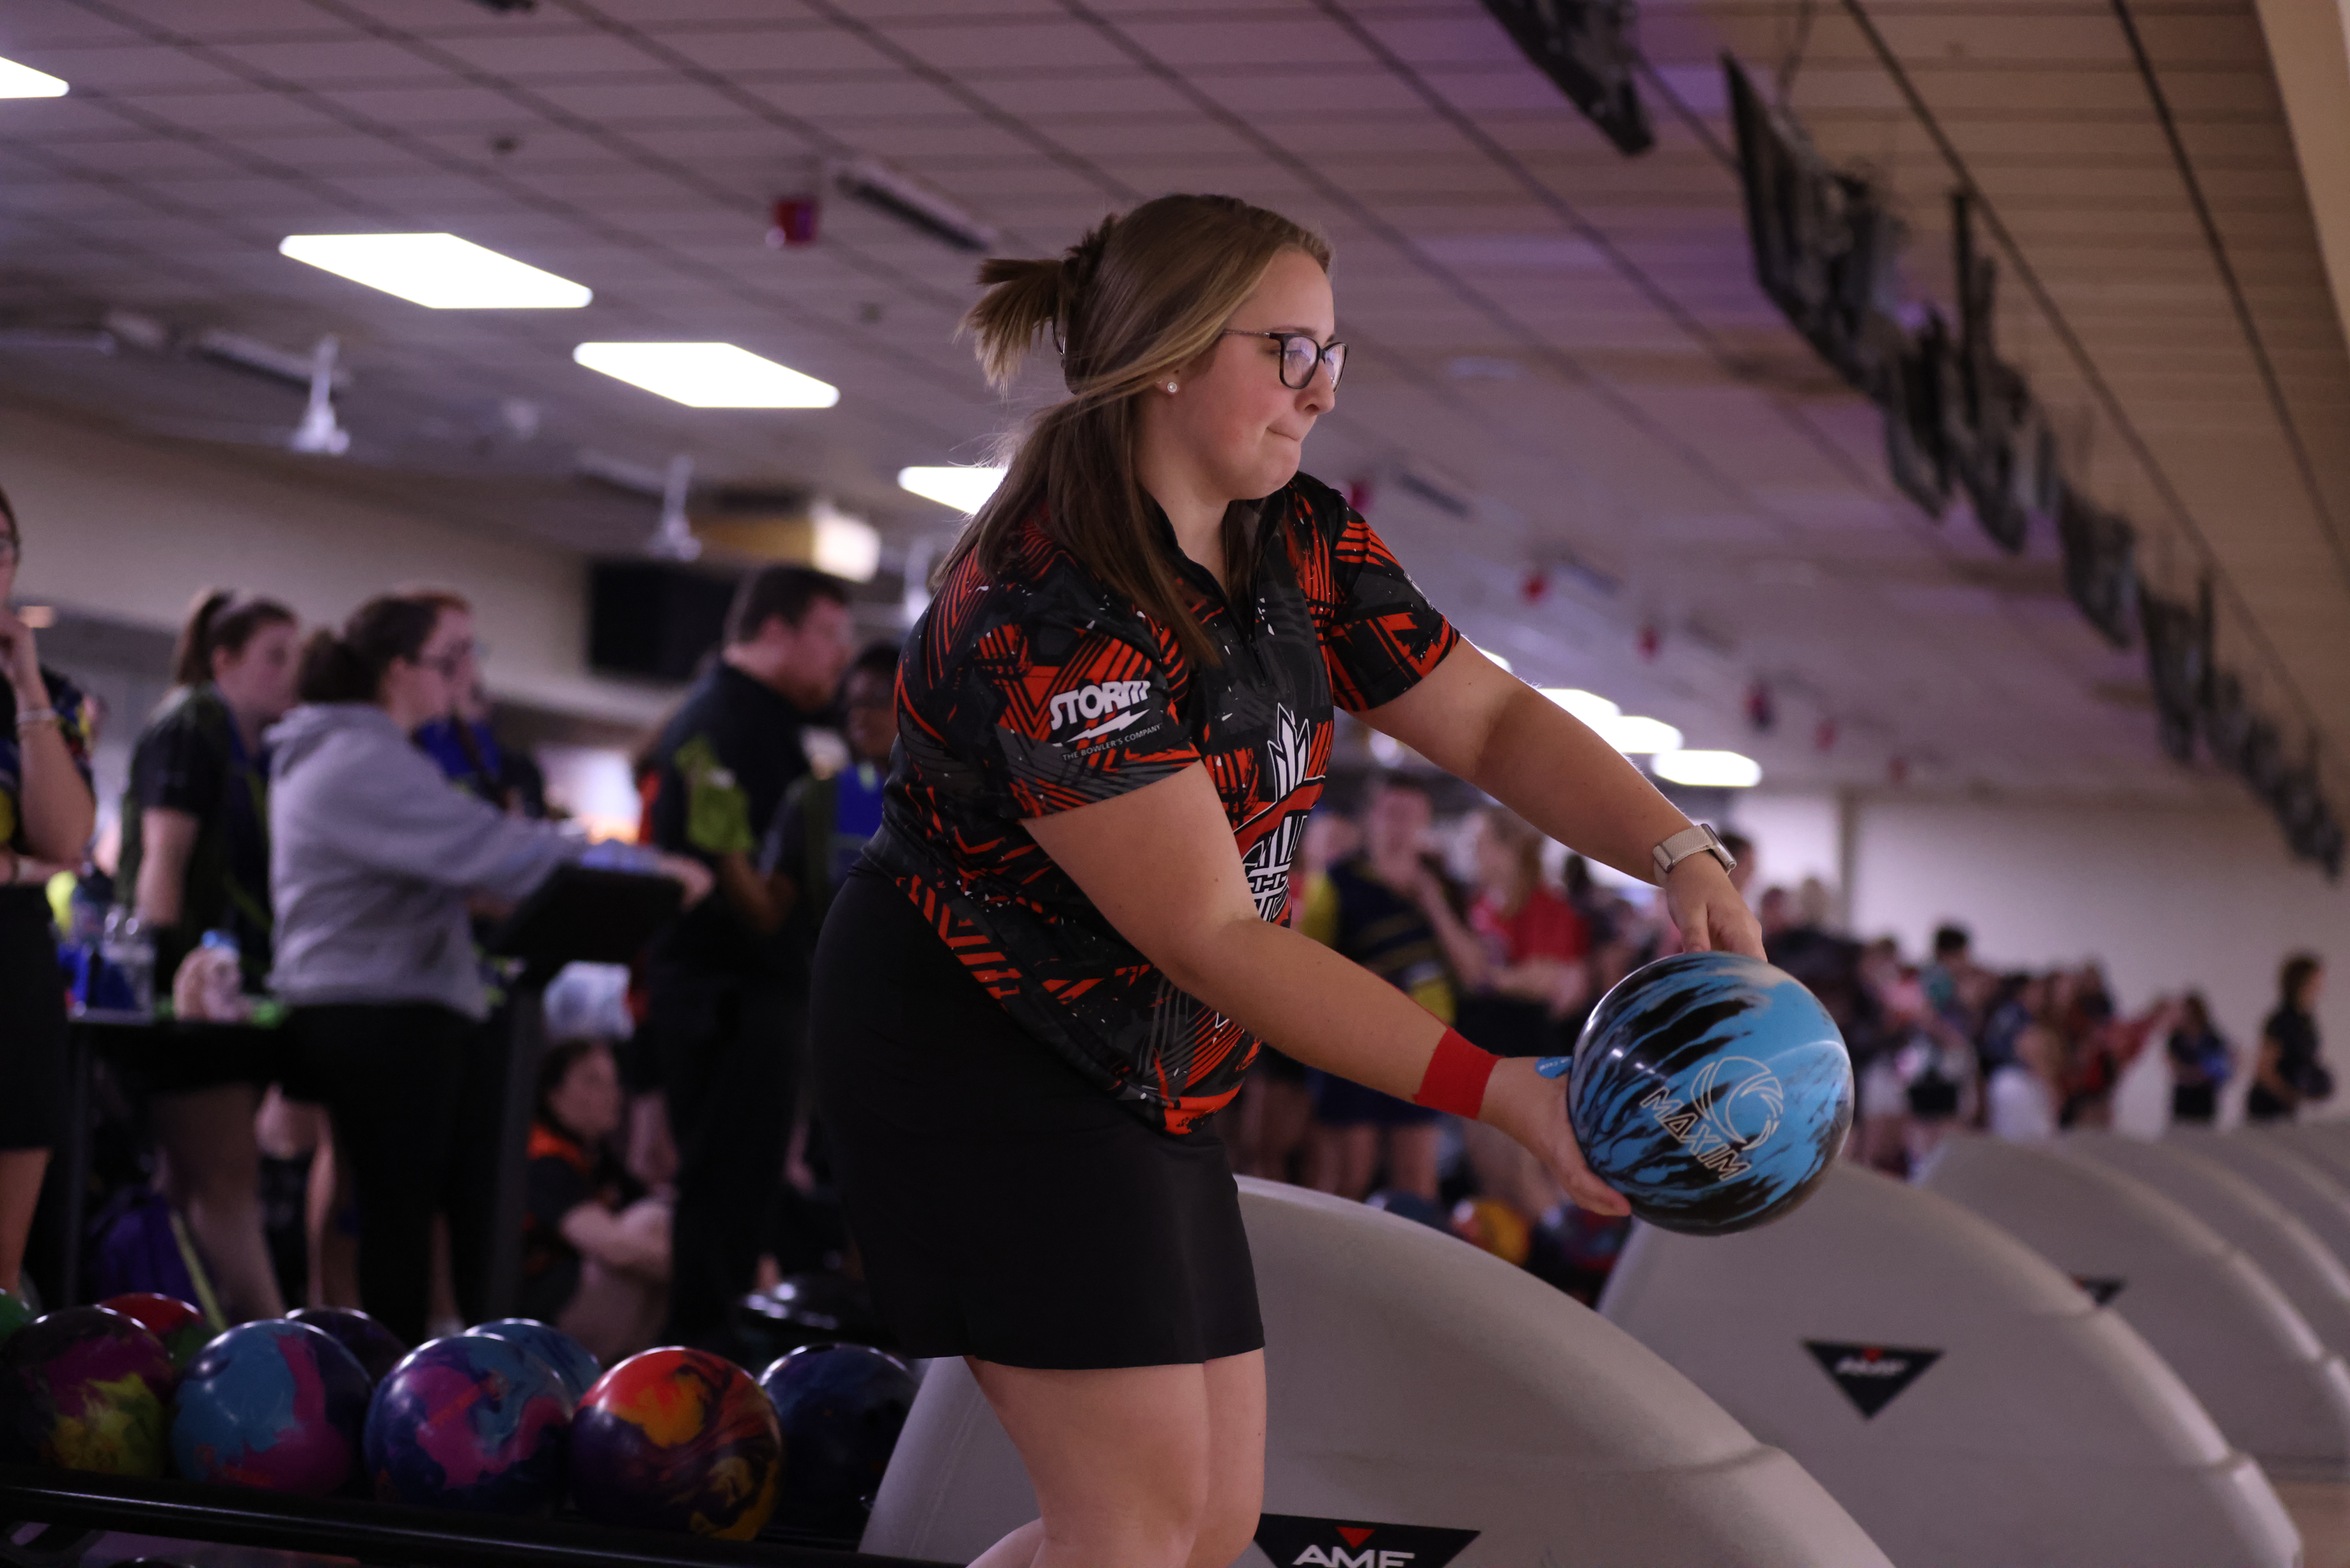 Women's Bowling finishes the Hoosier Classic in 20th-Place